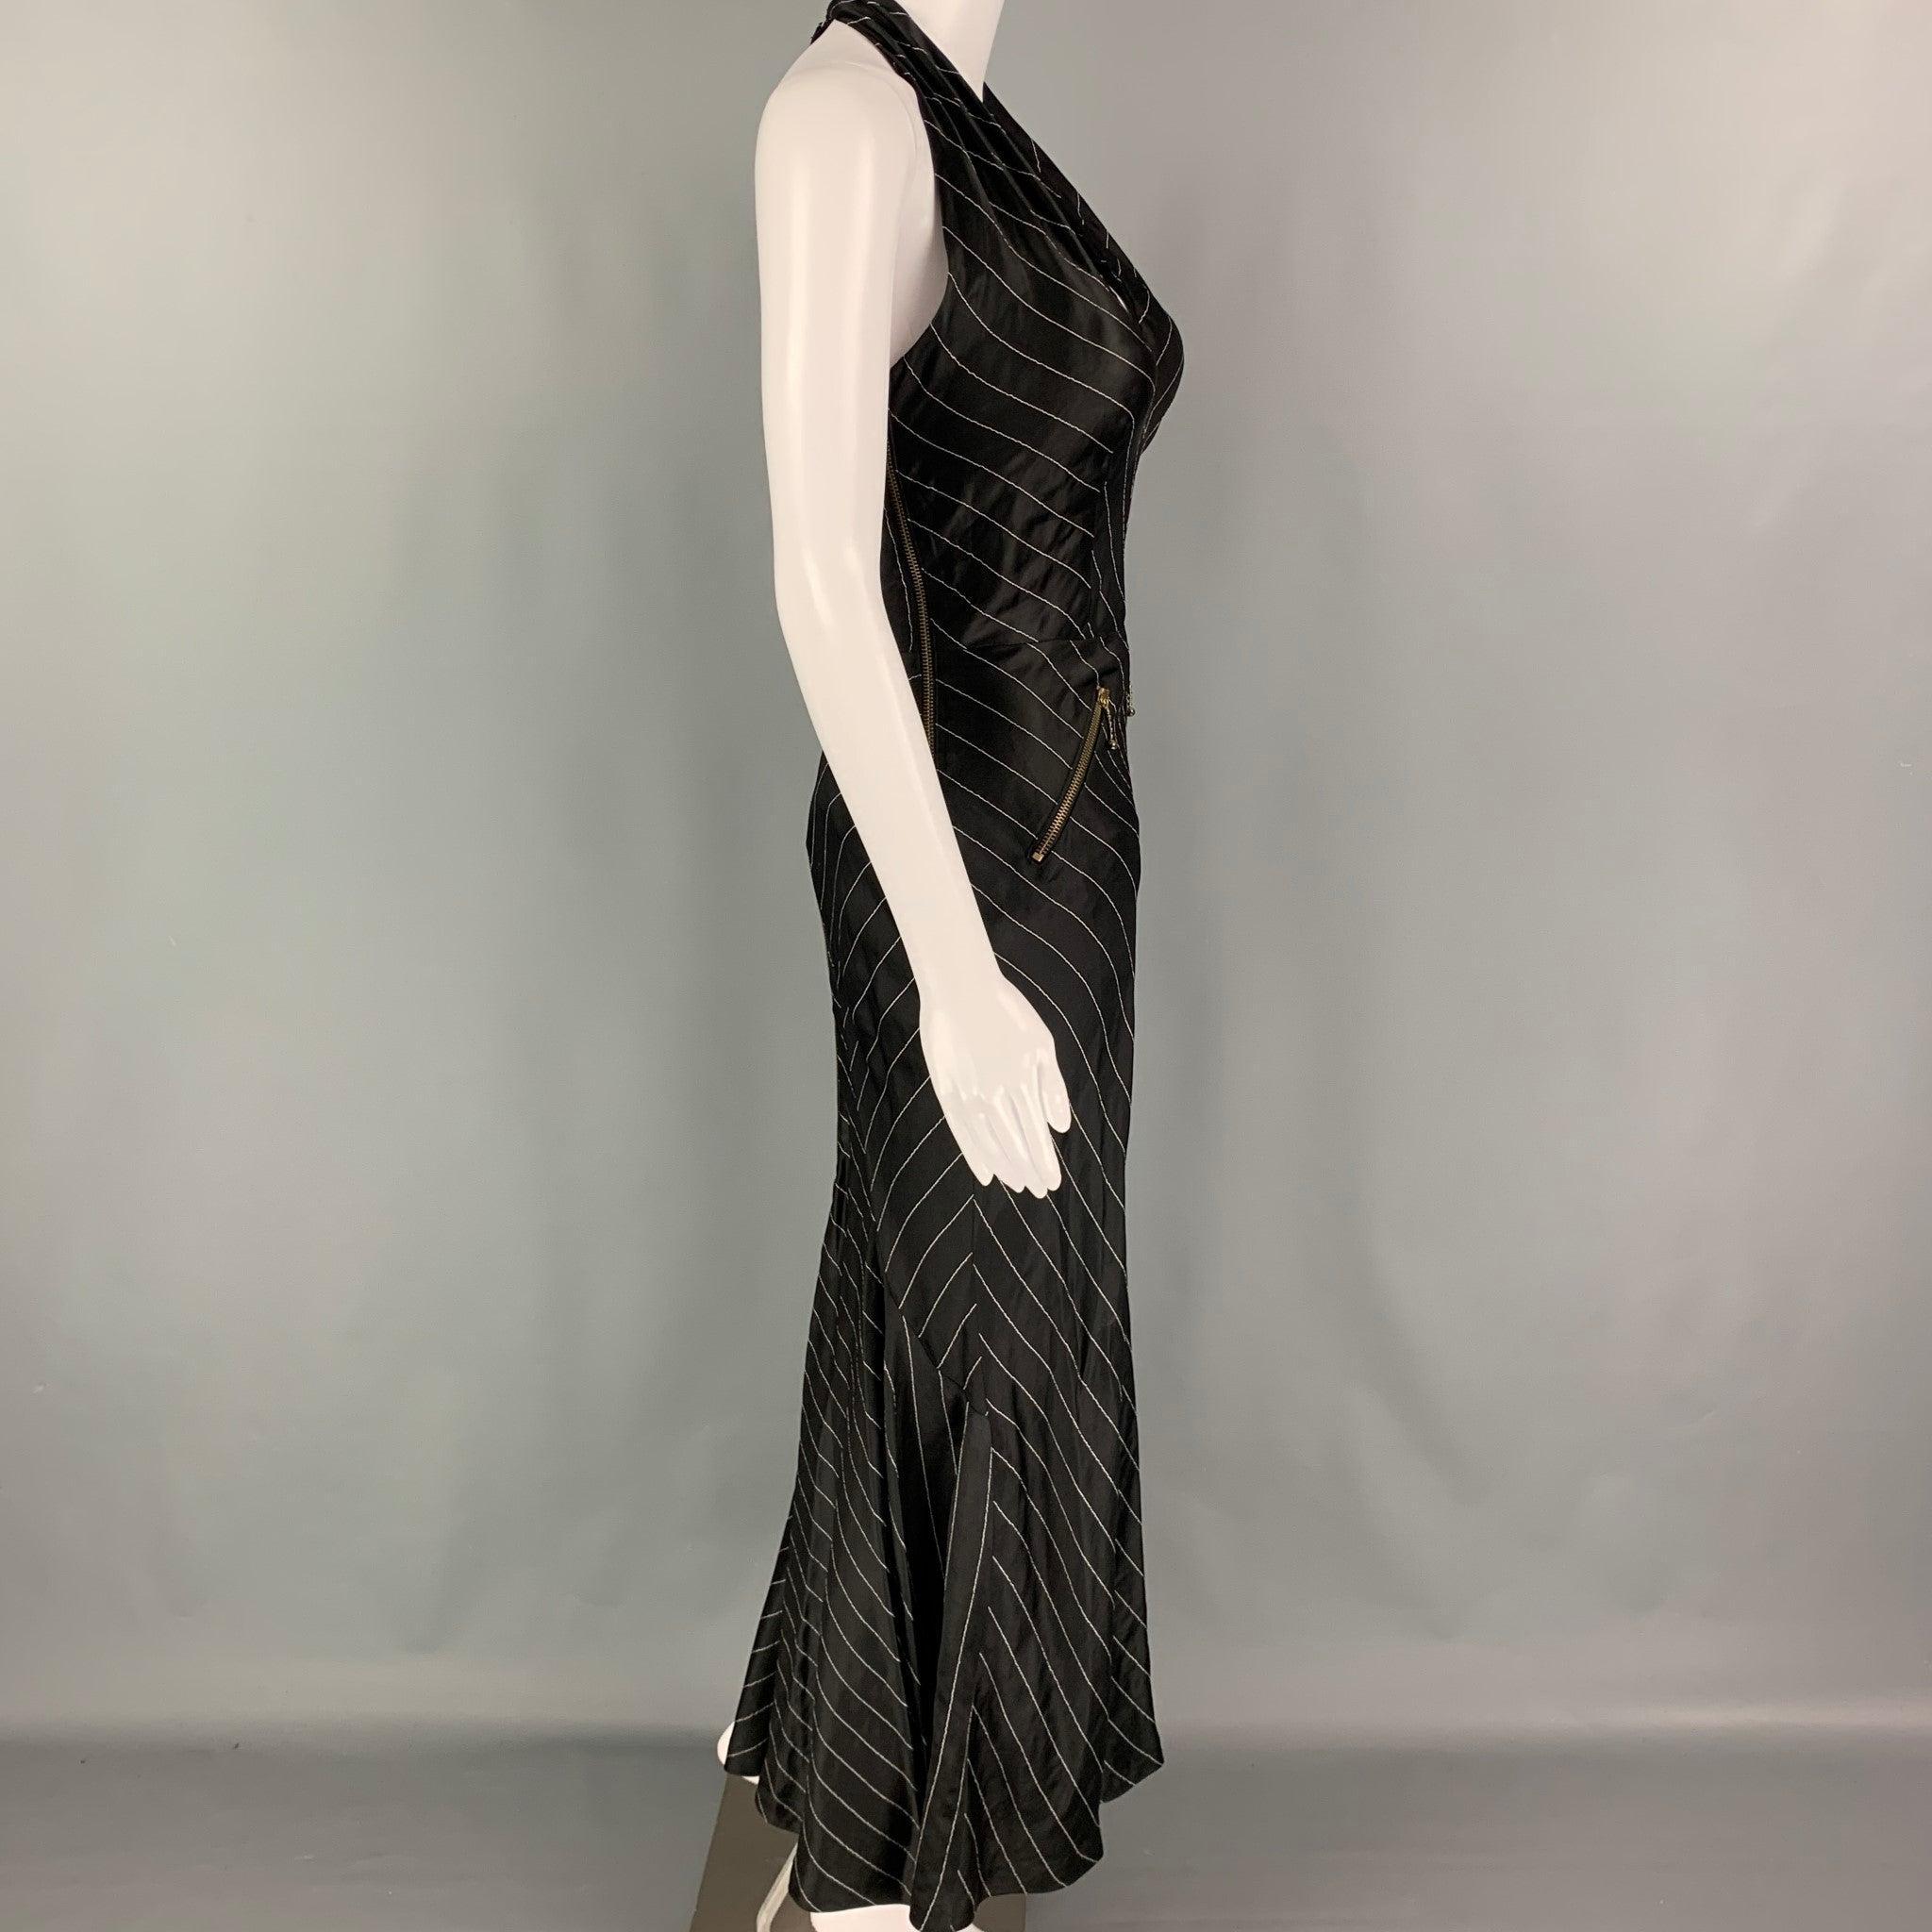 JEAN PAUL GAULTIER SS 1995 dress comes in a black & white pinstripe acetate blend featuring a open back, padded bust, zipper details, and a back zipper closure. Made in Italy.
Very Good Pre-Owned Condition. 

Marked:   40 

Measurements: 
  Bust: 28